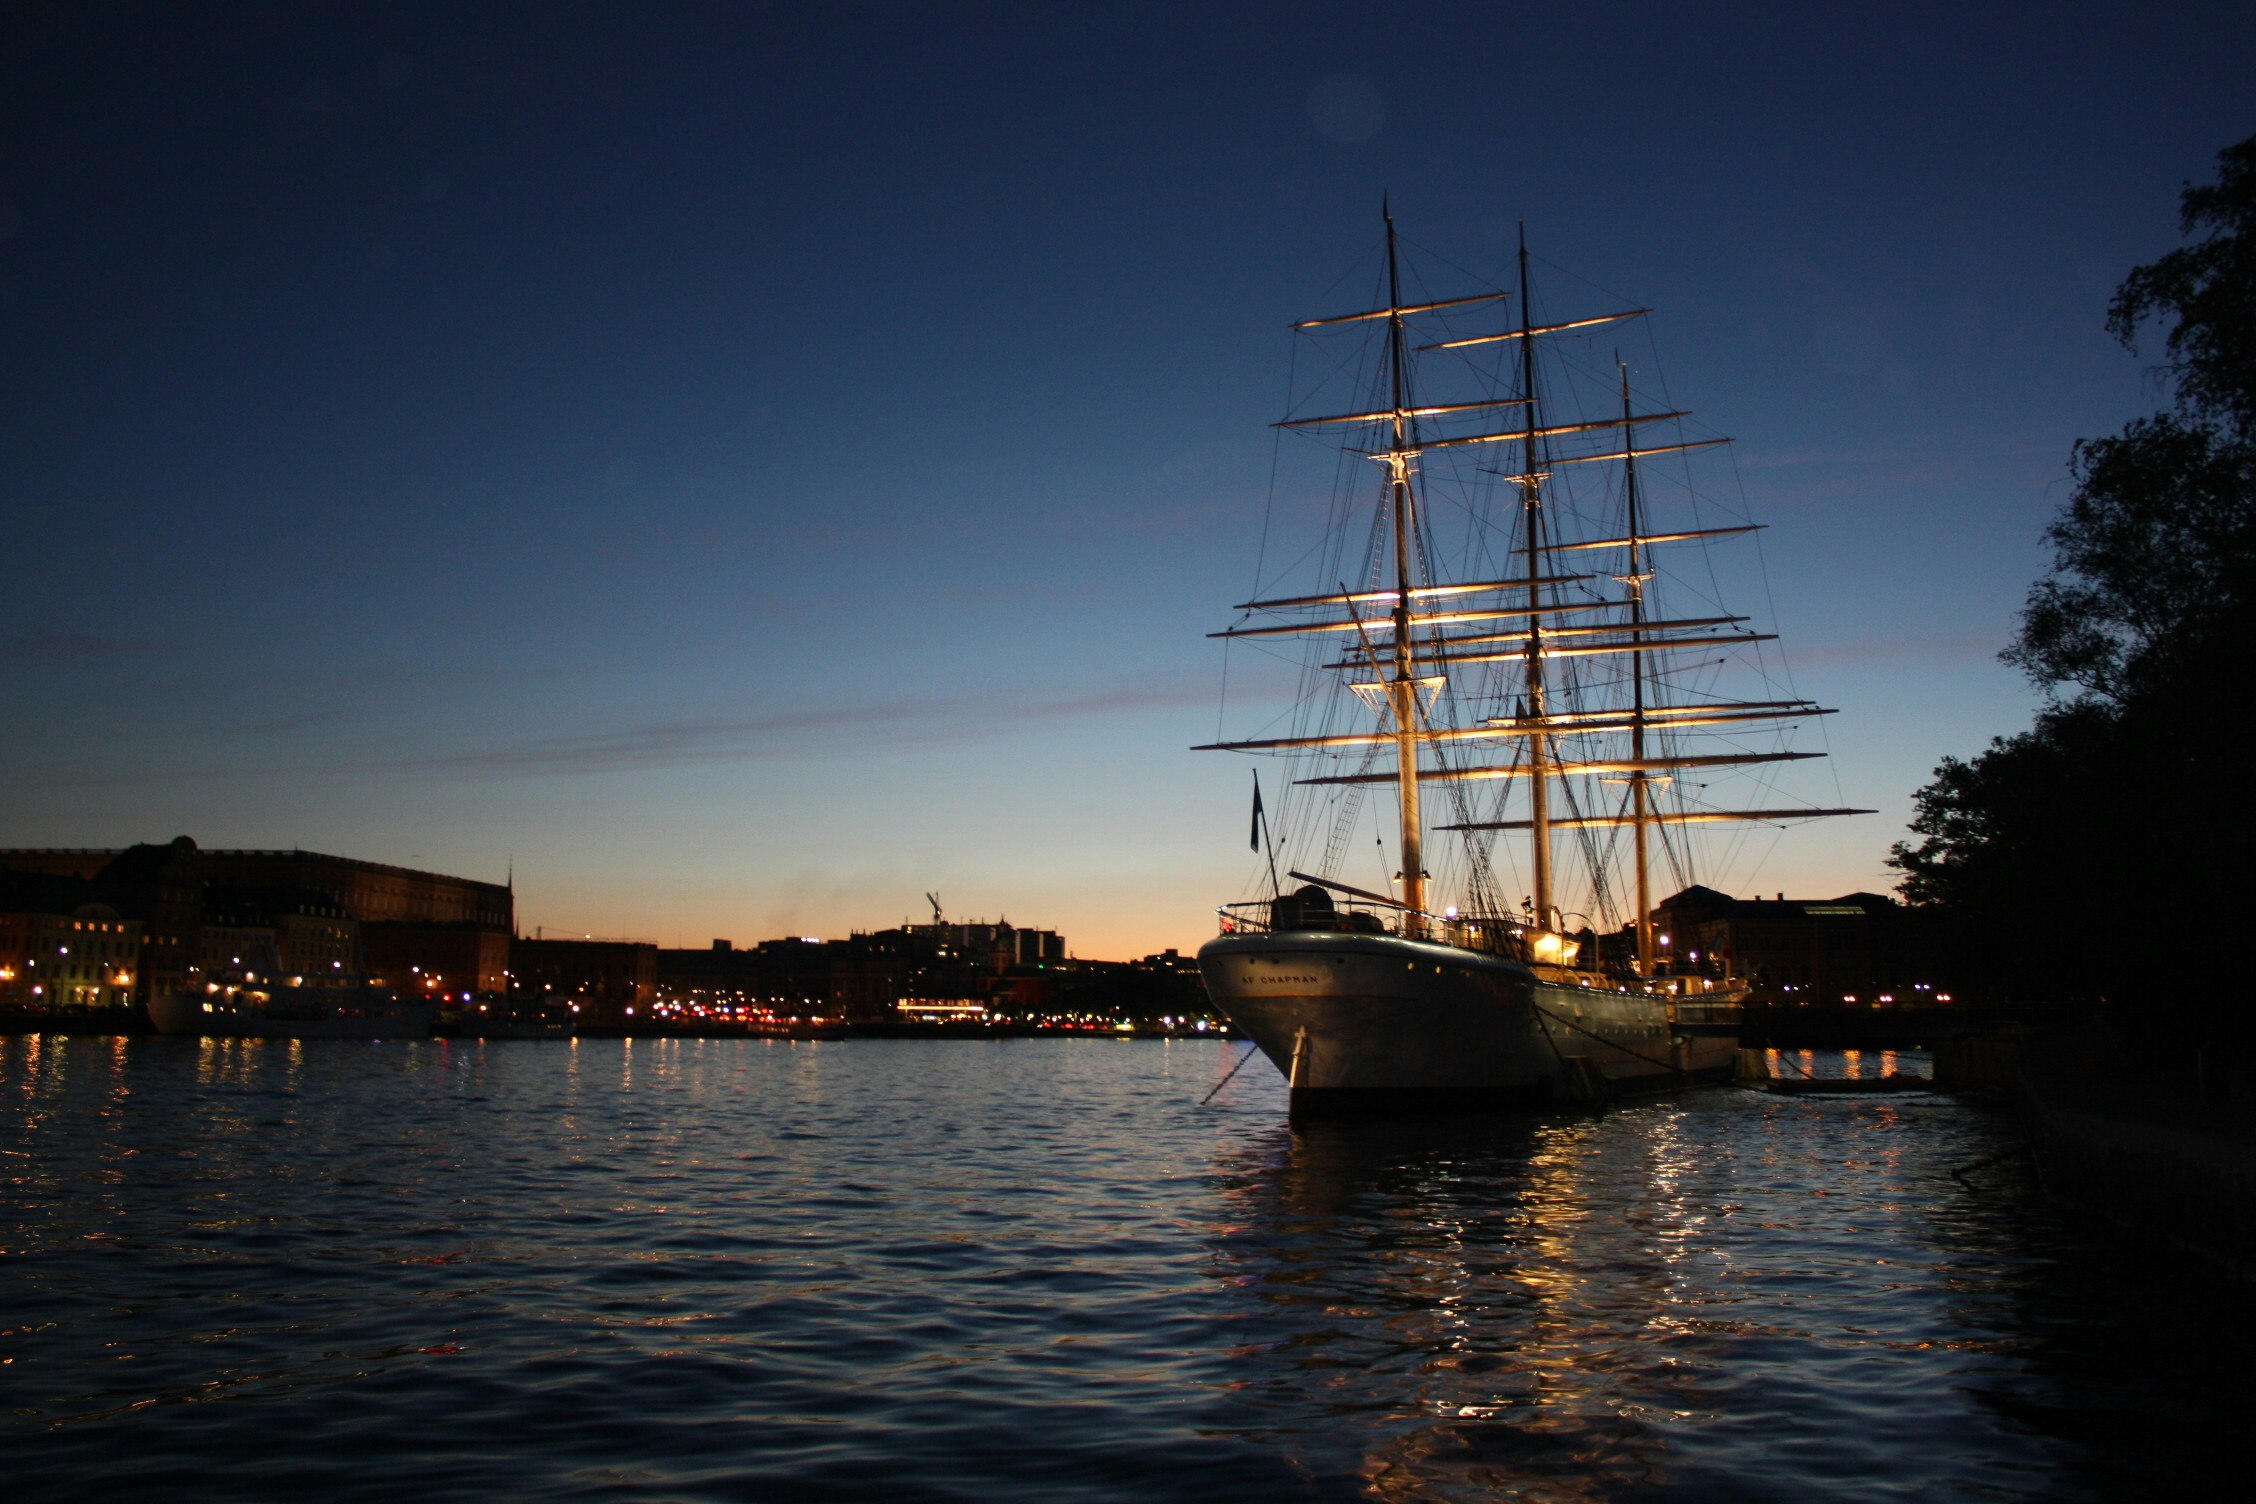 Moored on the western shore of the islet Skeppsholmen, the af Chapman tall ship youth hostel